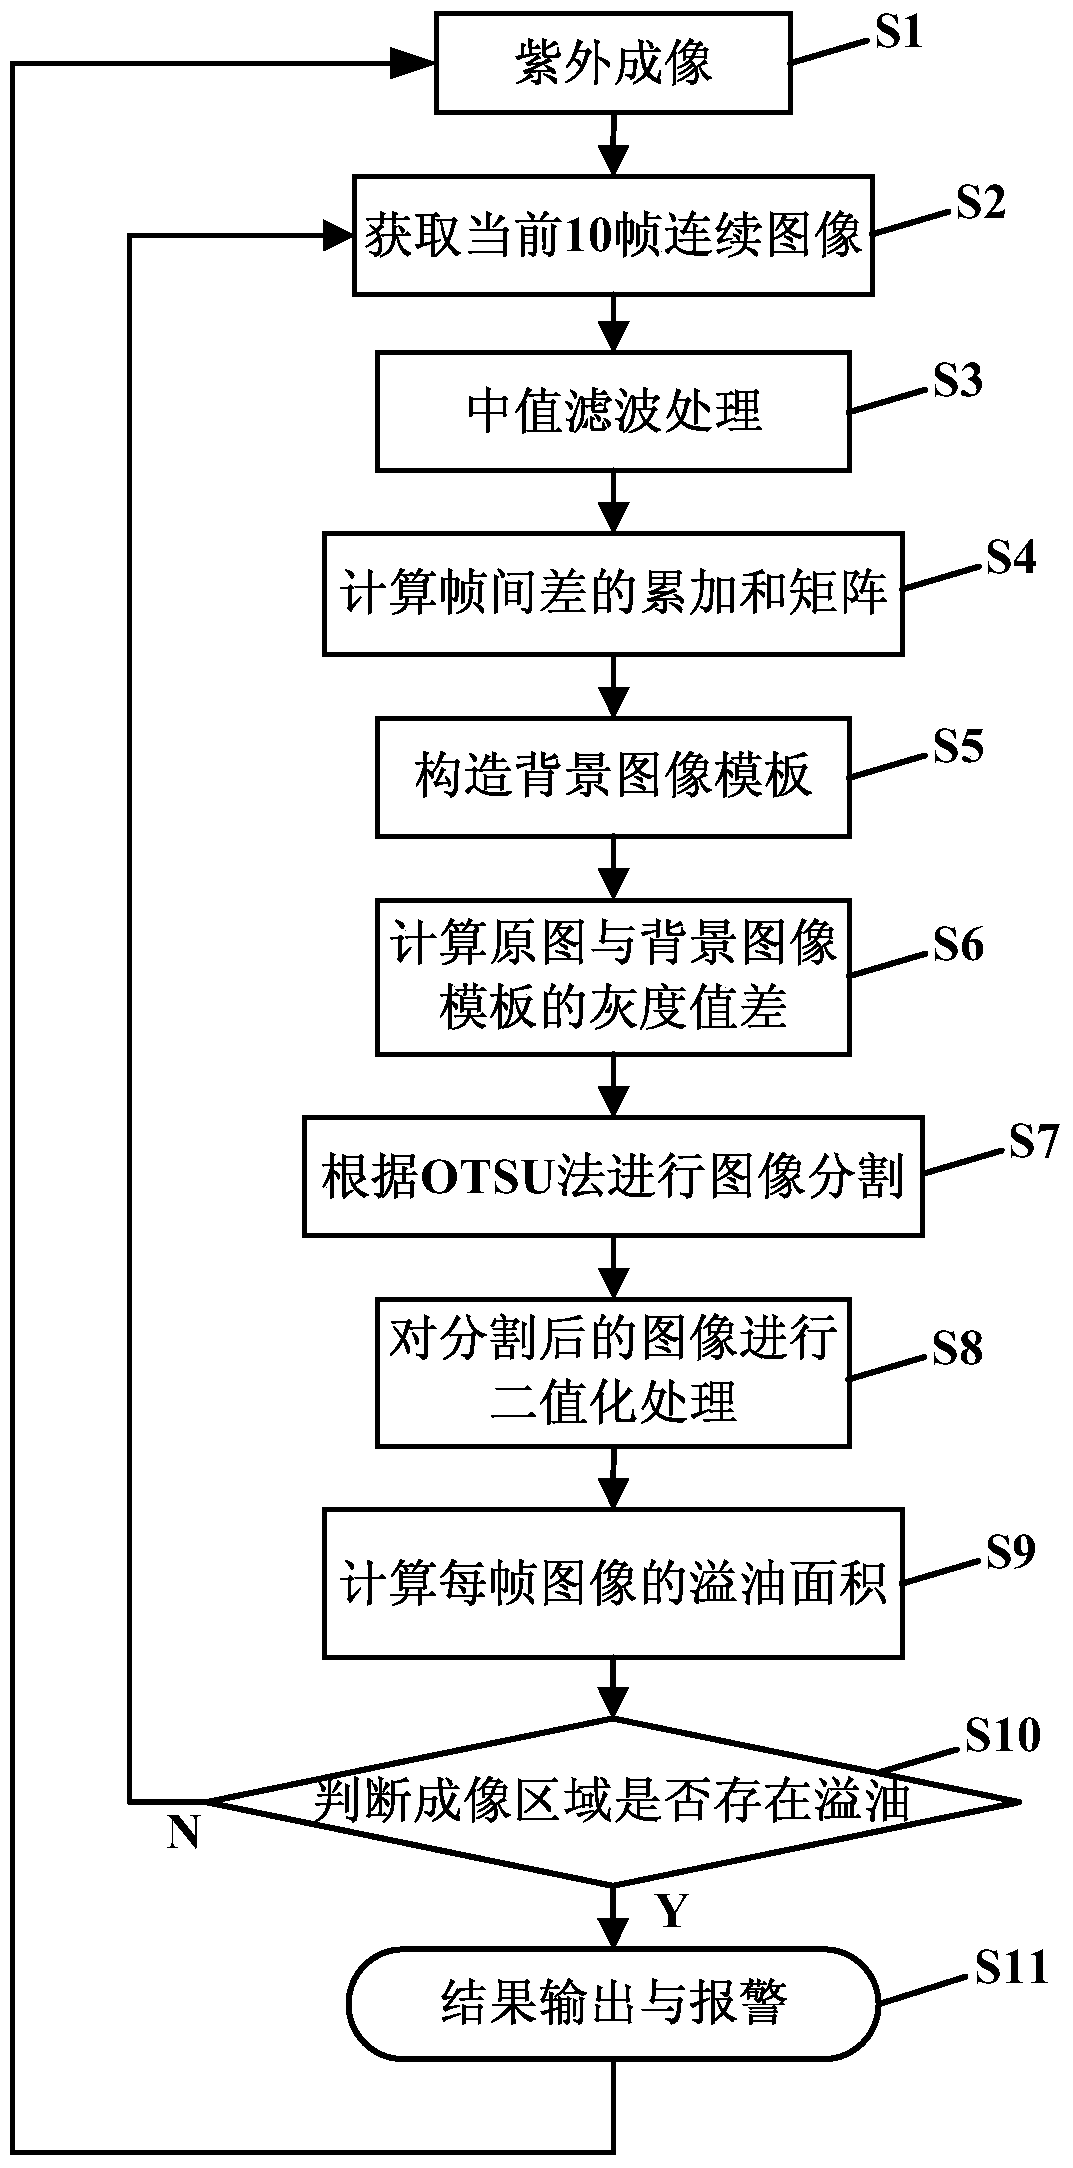 A water surface oil spill detection system and method based on ultraviolet images